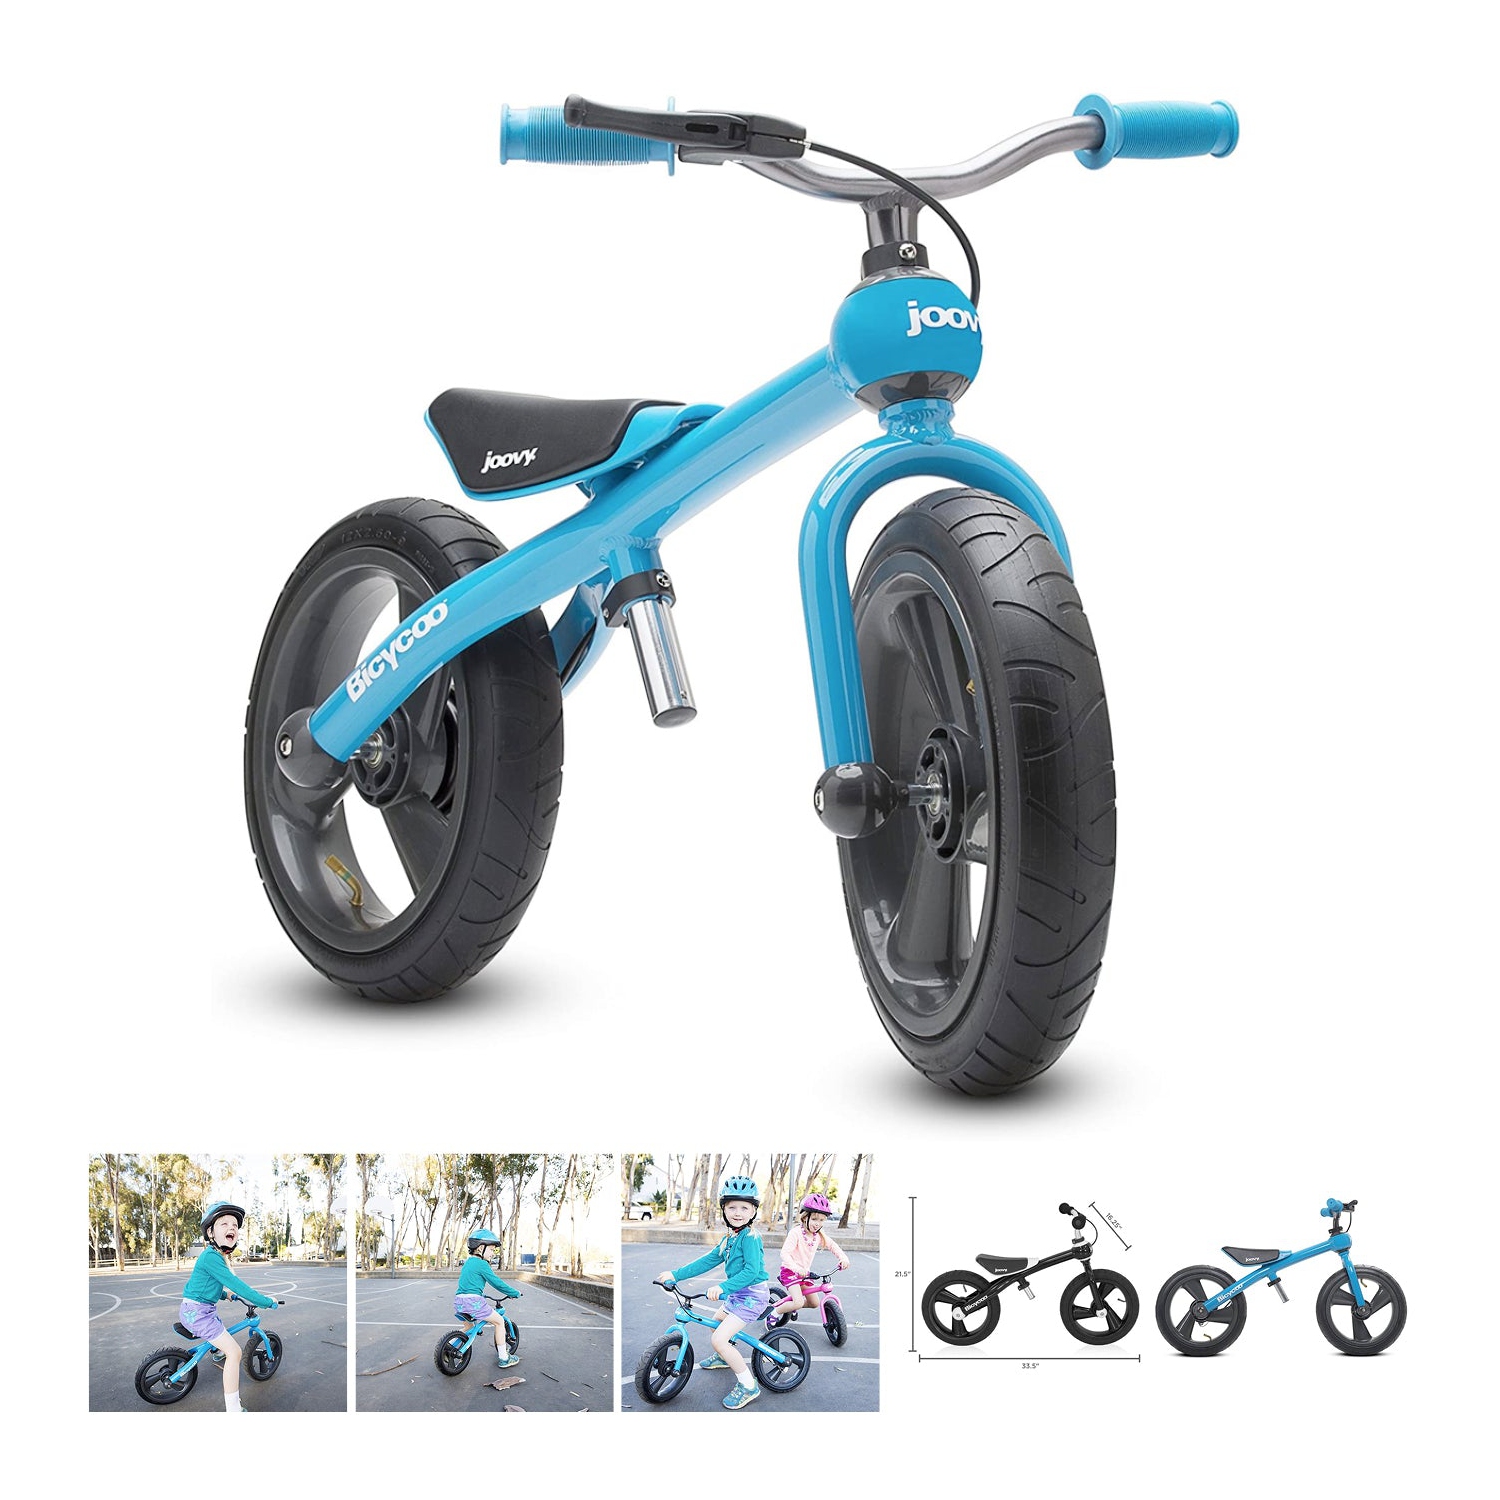 Joovy bicycoo balance bike with adjustable seat for toddlers and kids, blue/bleu